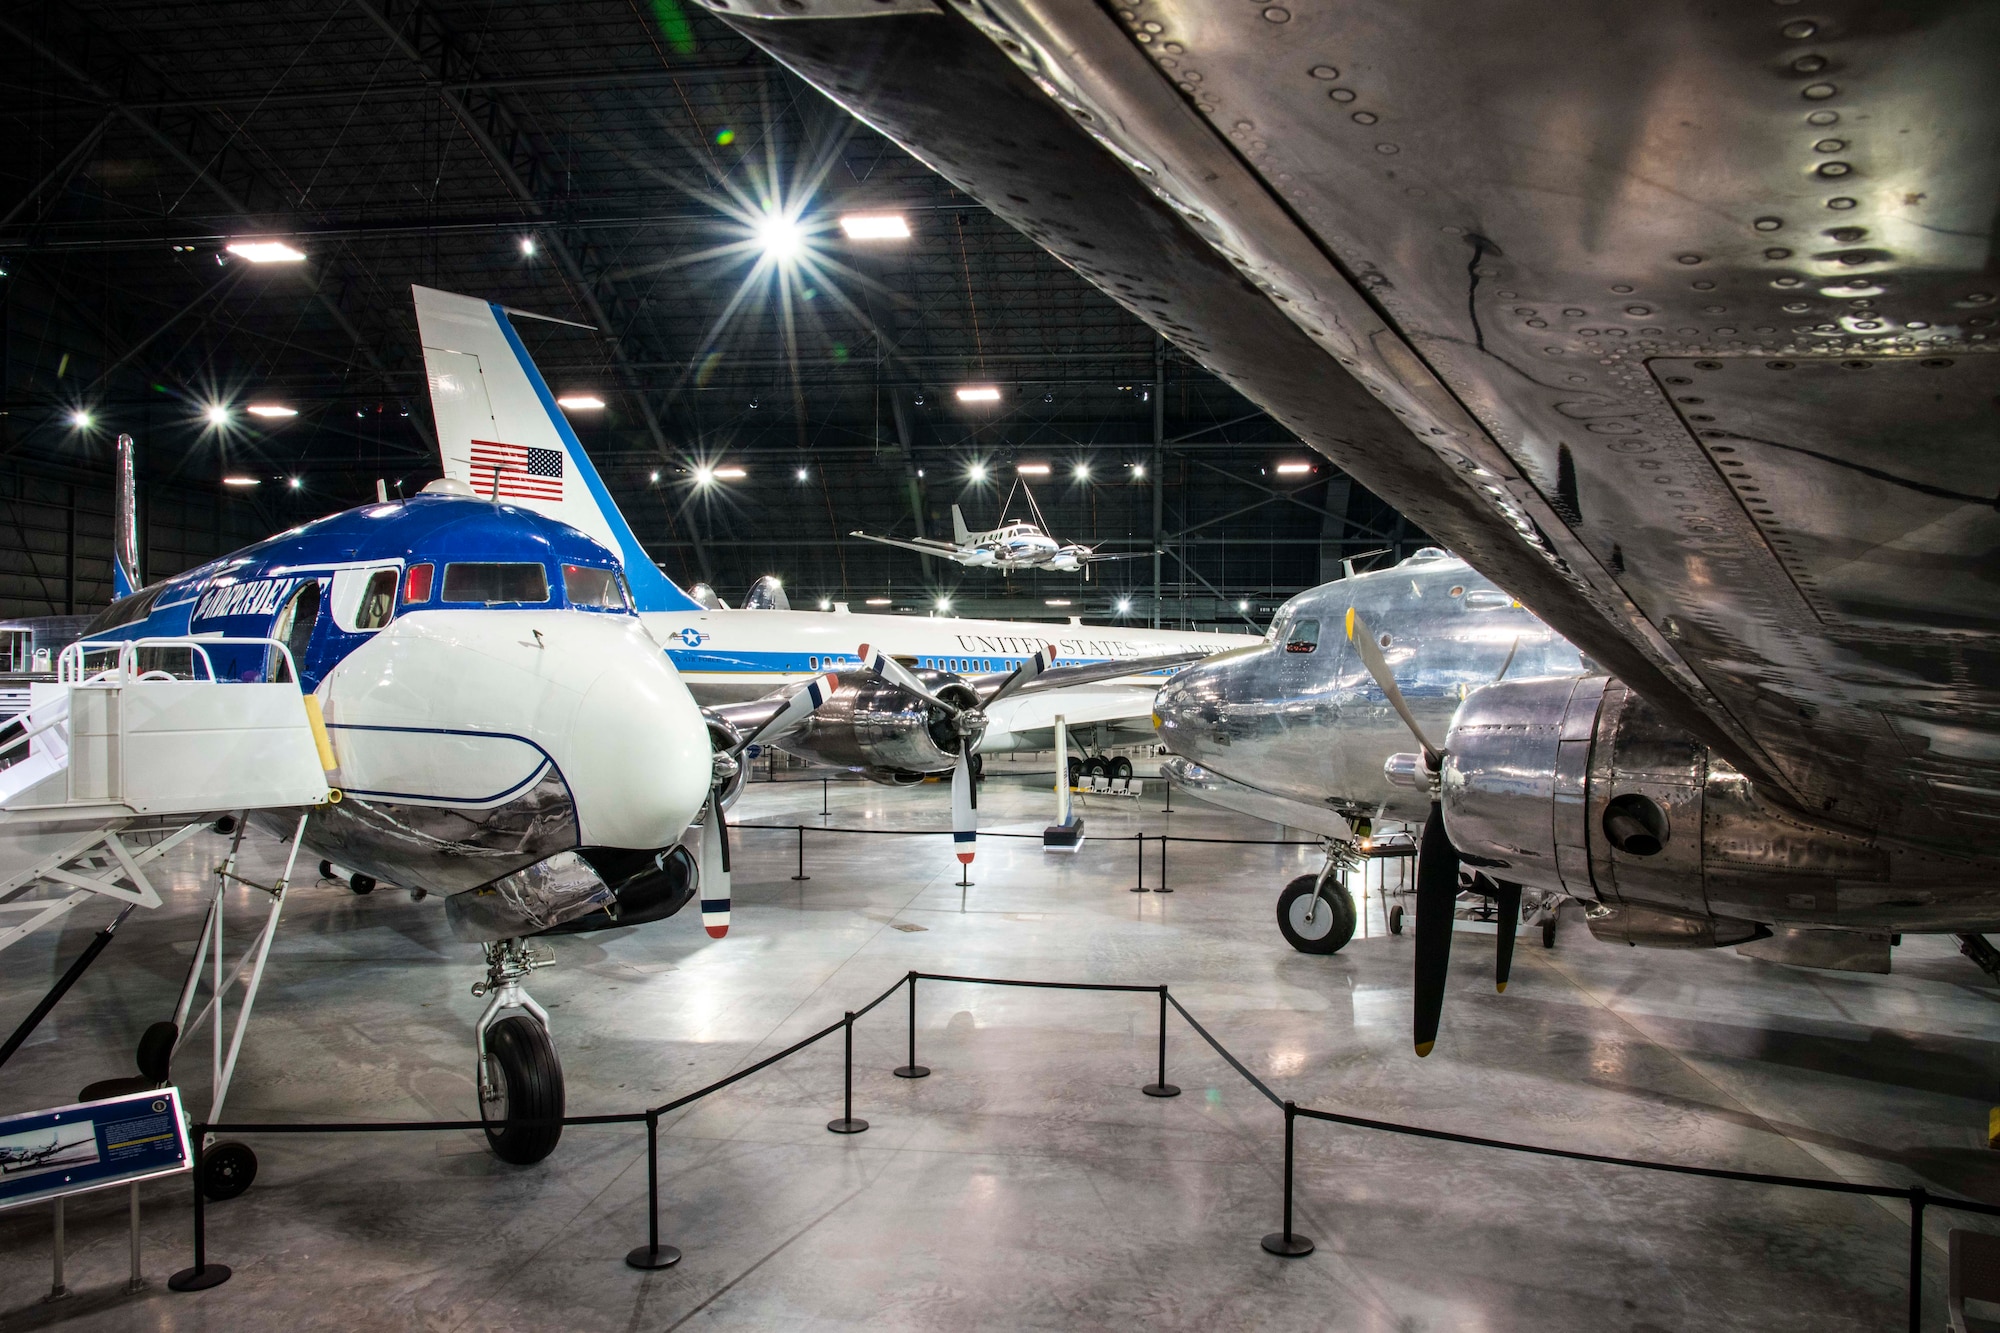 DAYTON, Ohio -- The Douglas VC-118 “Independence” and the Douglas VC-54C “Sacred Cow”  on display in the Presidential Gallery at the National Museum of the United States Air Force. (U.S. Air Force photo by Ken LaRock)